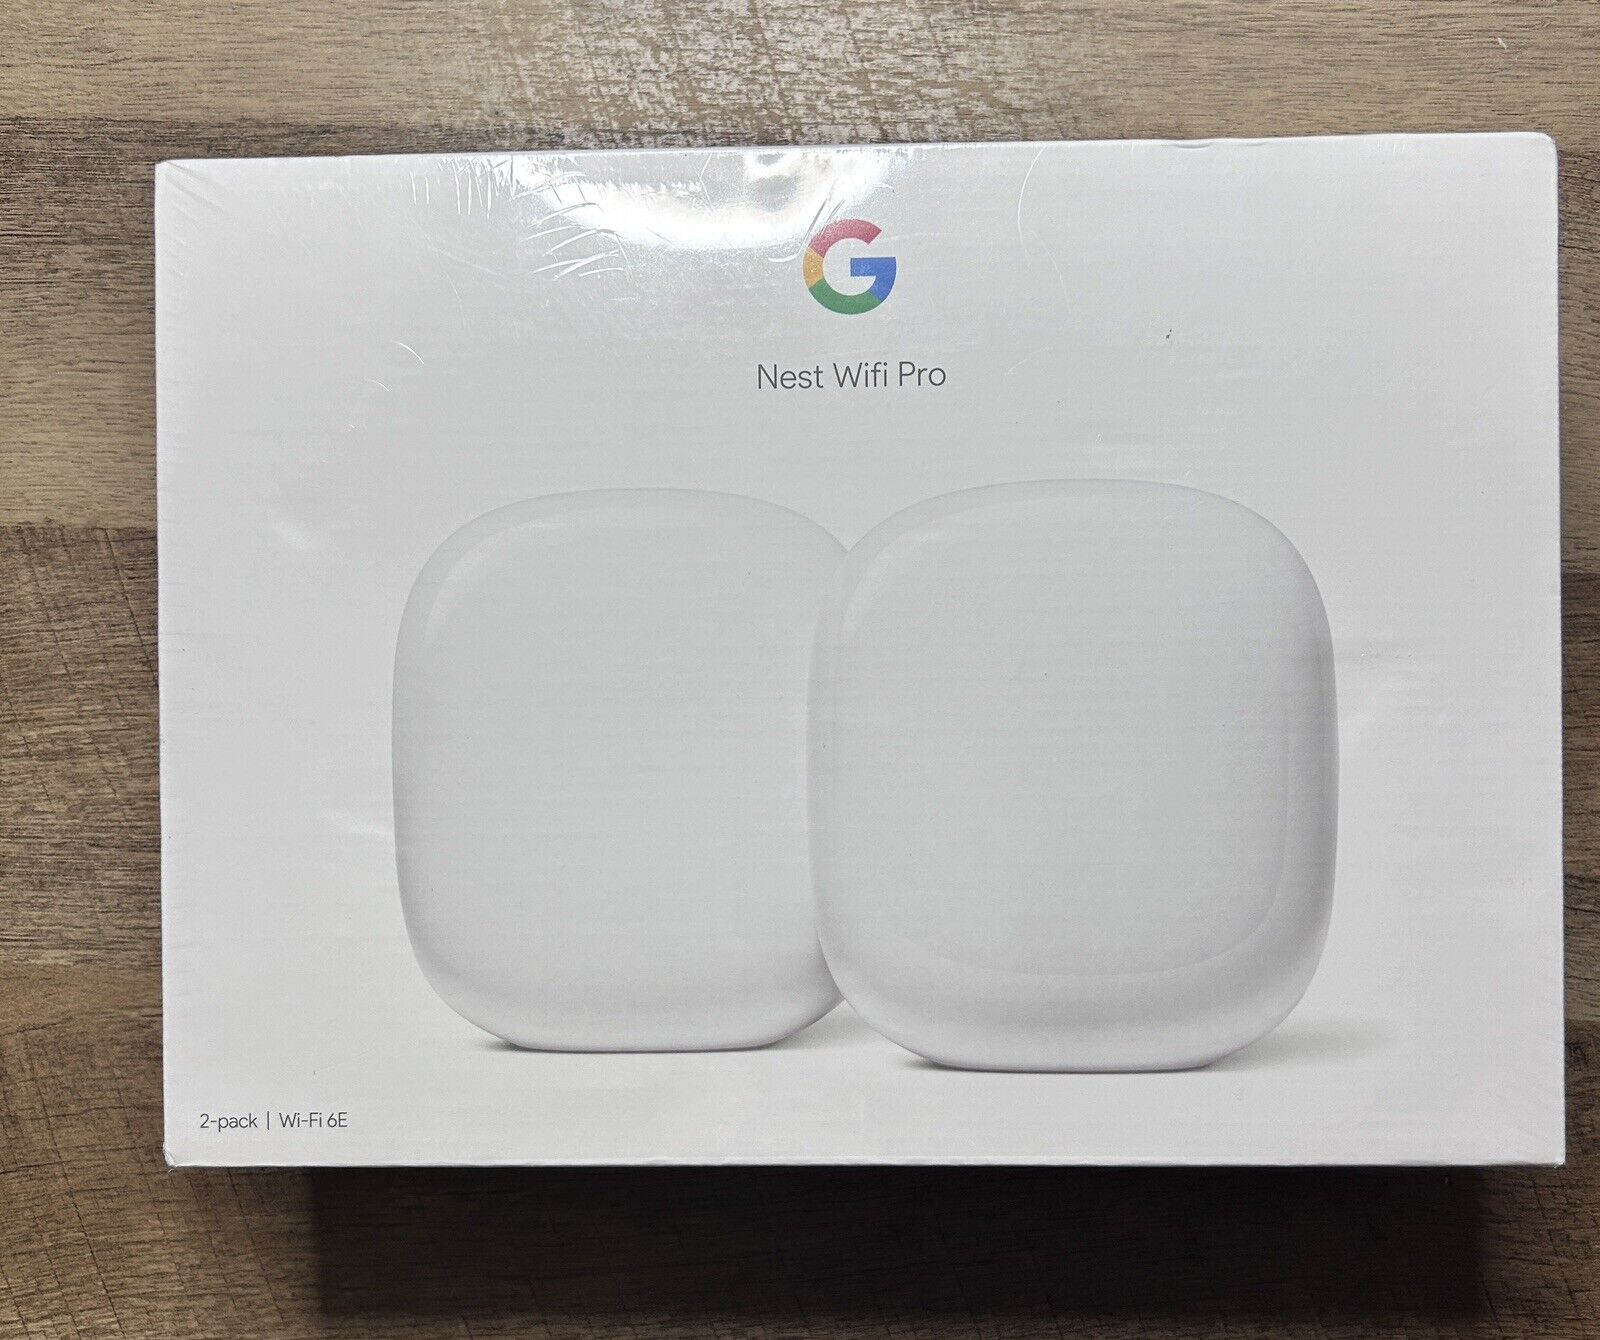 Google Nest Wifi Pro Wi-Fi 6E Router Mesh System - Snow (2-Pack)